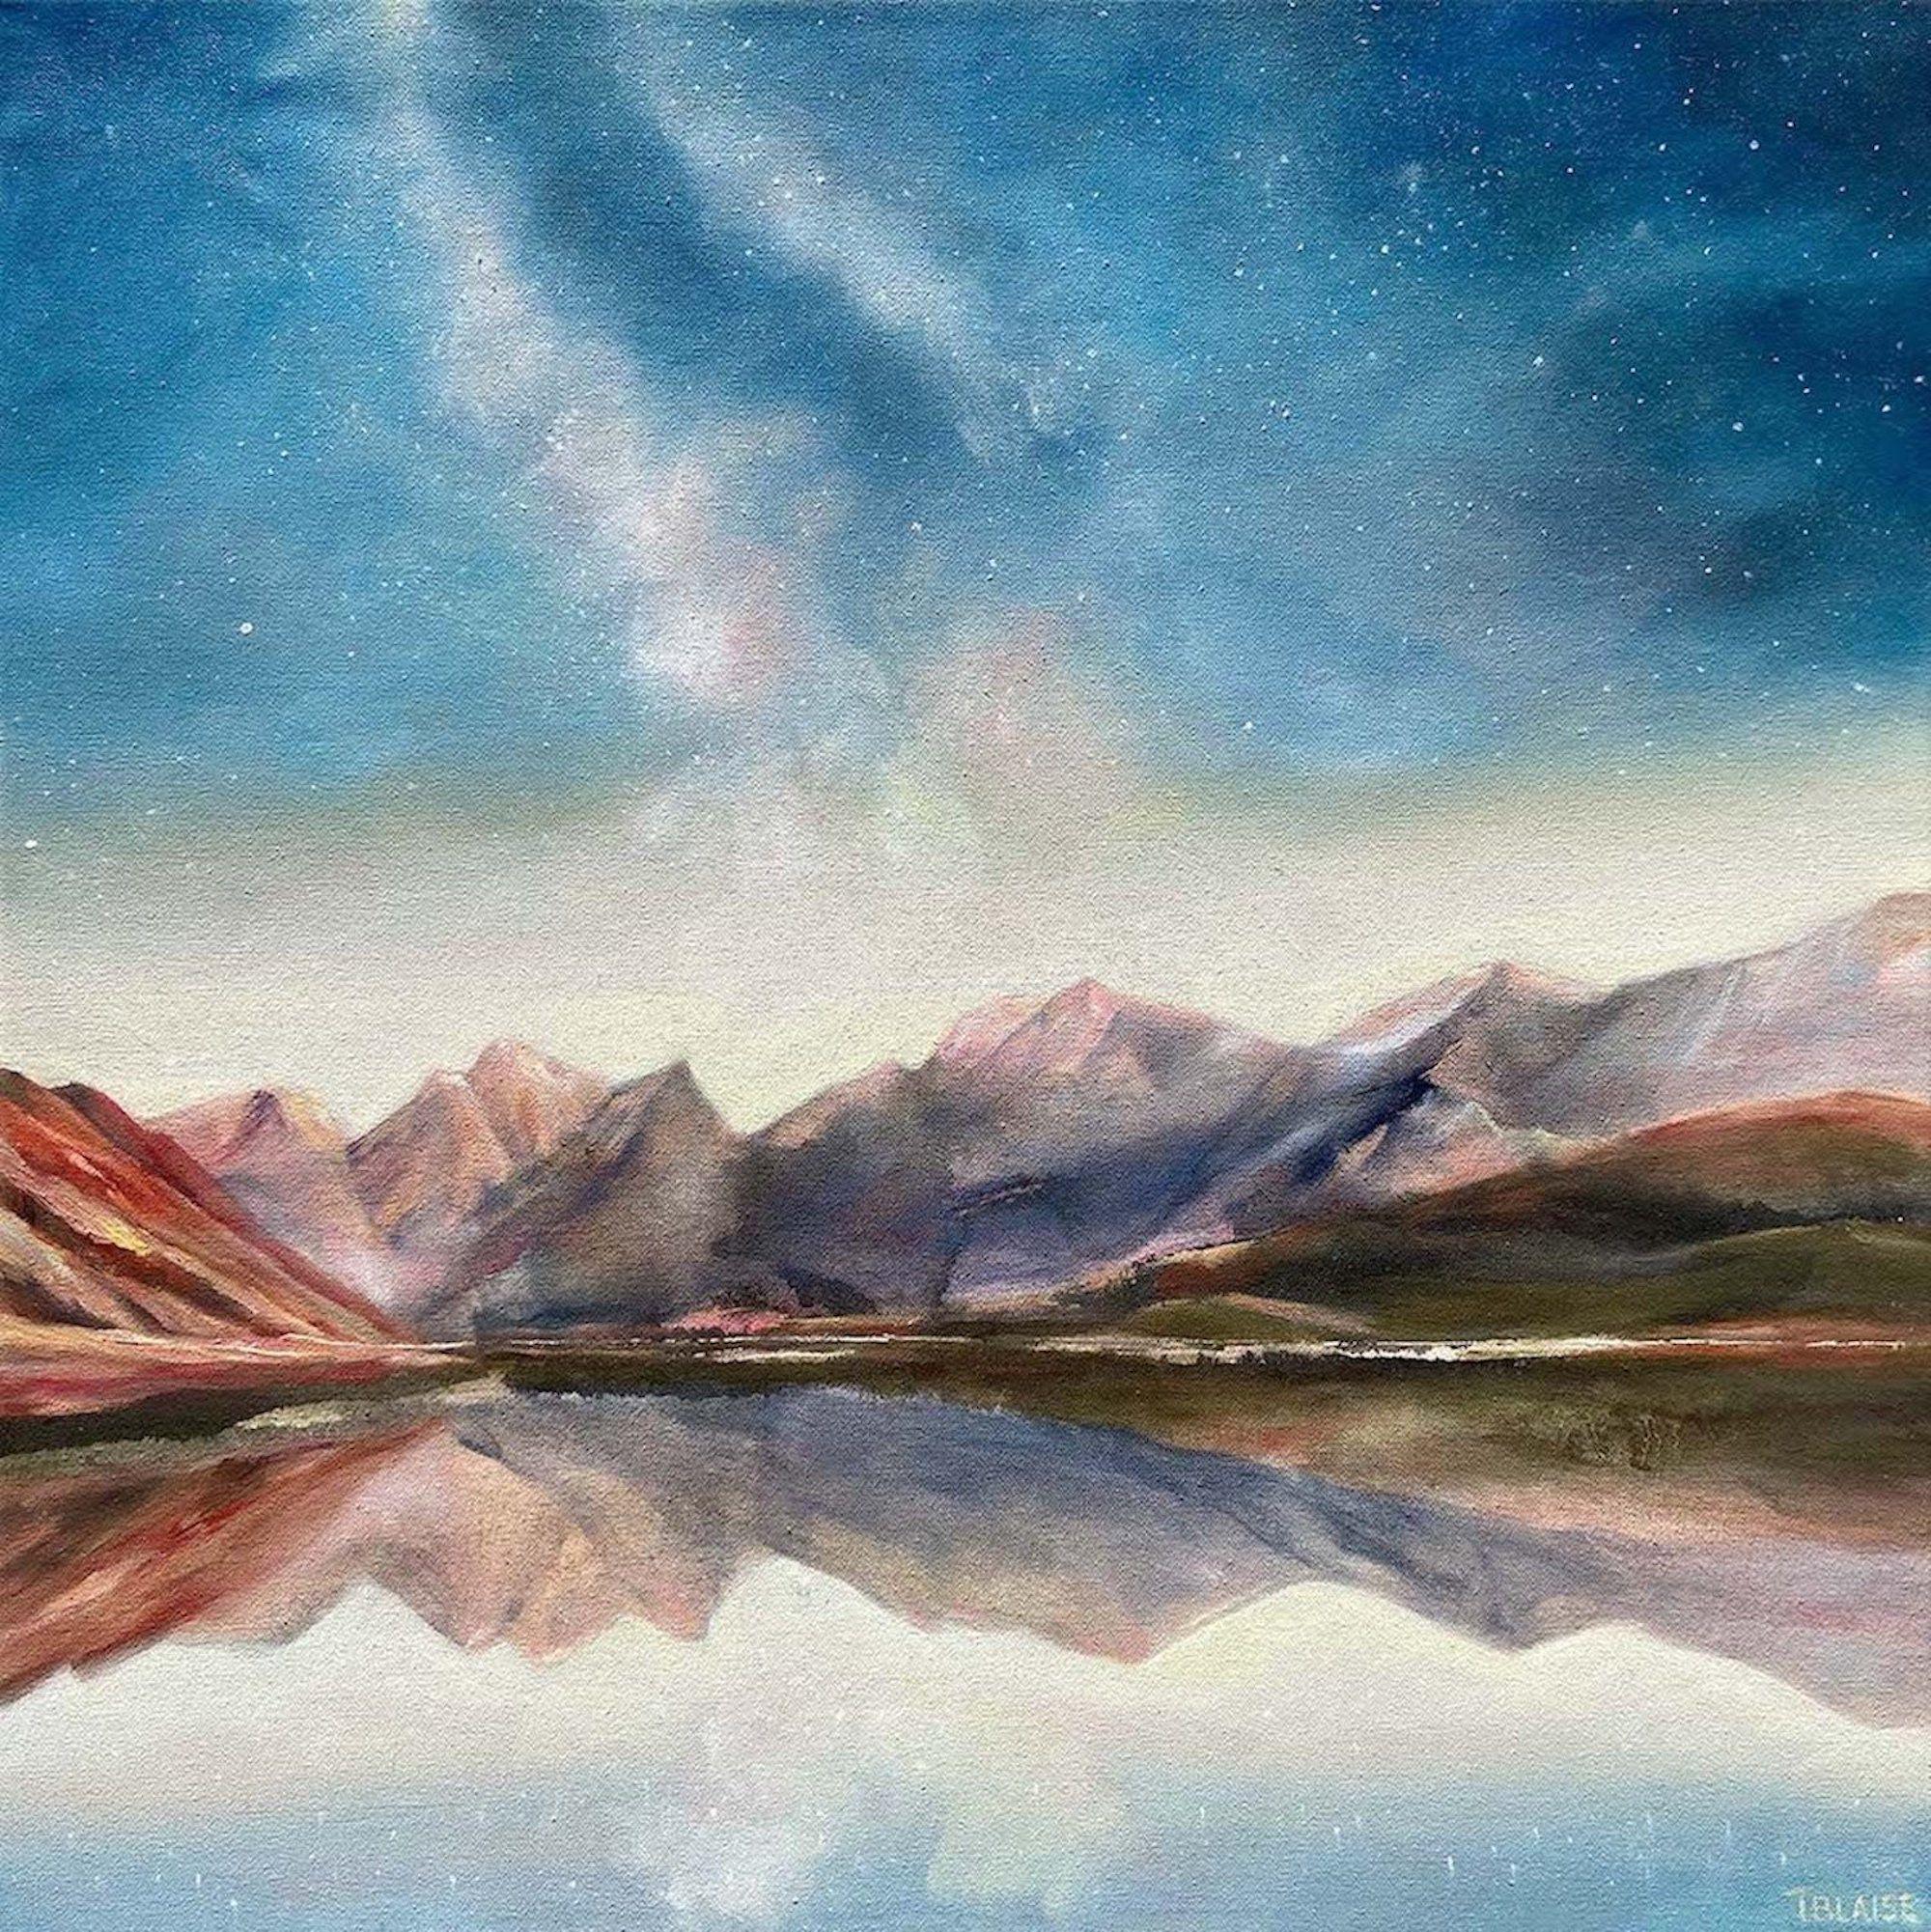 "Air, Earth and Sky" is part of the The "Summits and Starlight" collection.  The "Summits and Starlight" collection of paintings captures the spirit of the aurora borealis shining over mountain peaks.  Inspired by the mystical feel of night skies